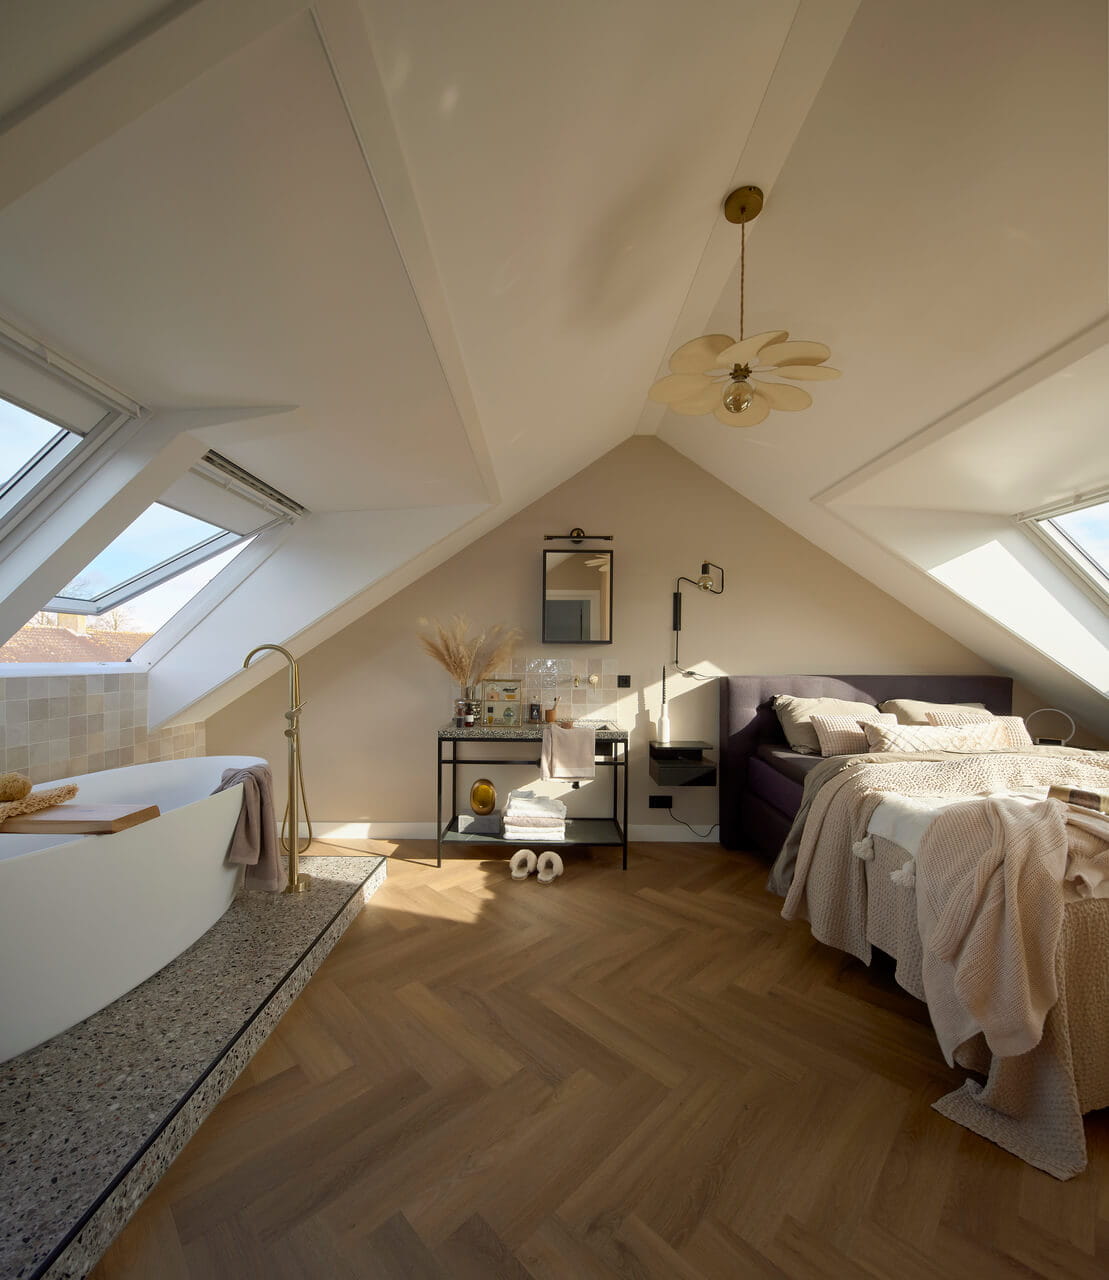 Attic with a bed and bath tub in one area.